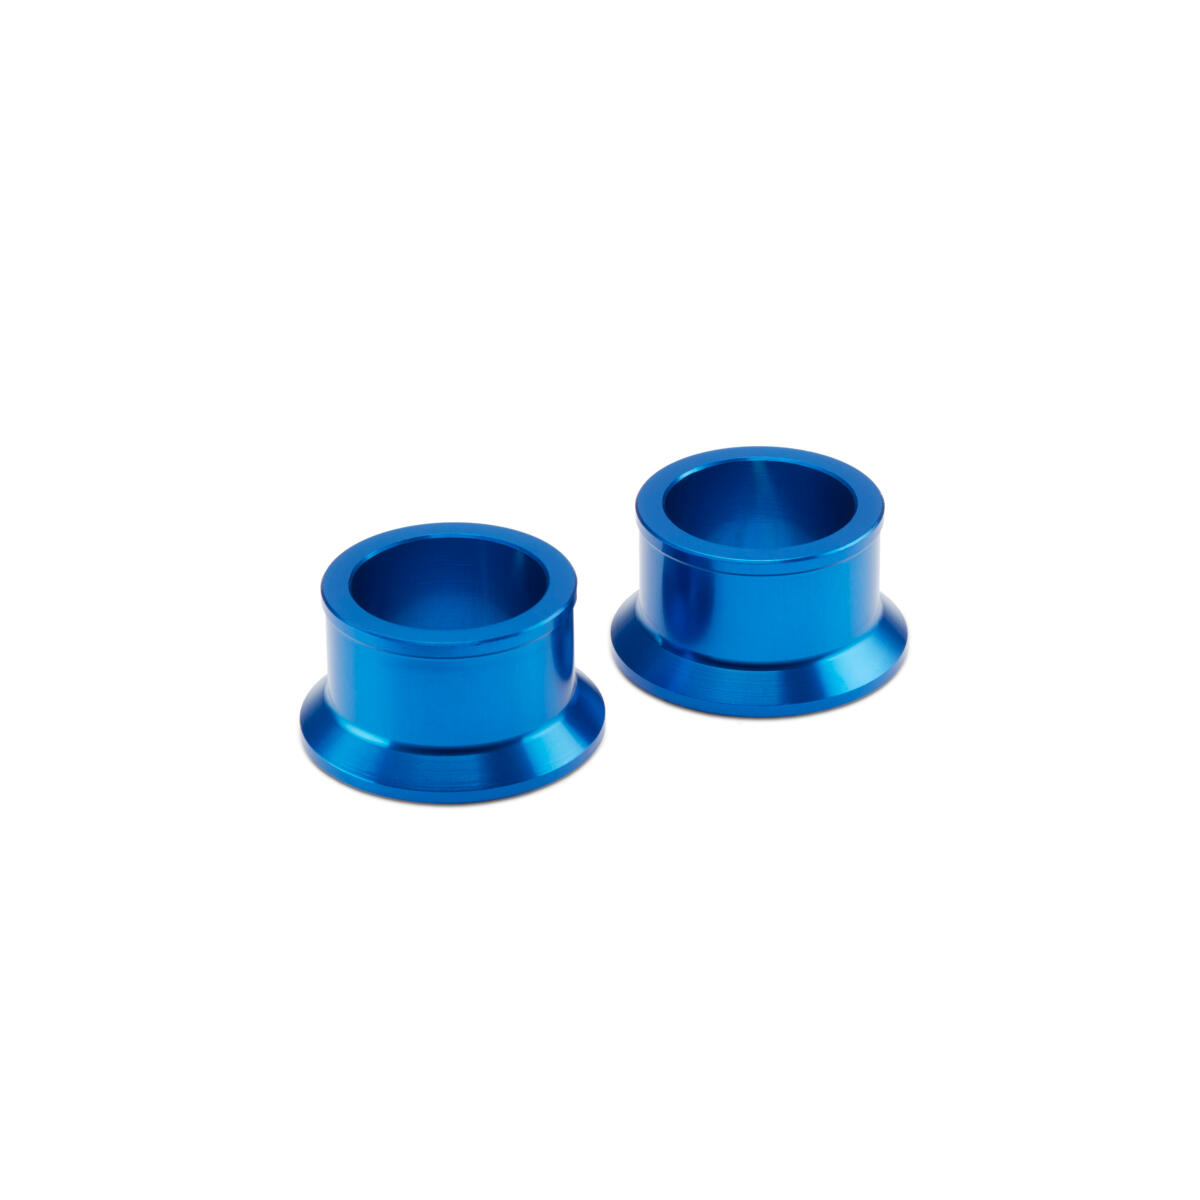 Get Factory Racing look and function with these blue 25mm rear wheel spacers.